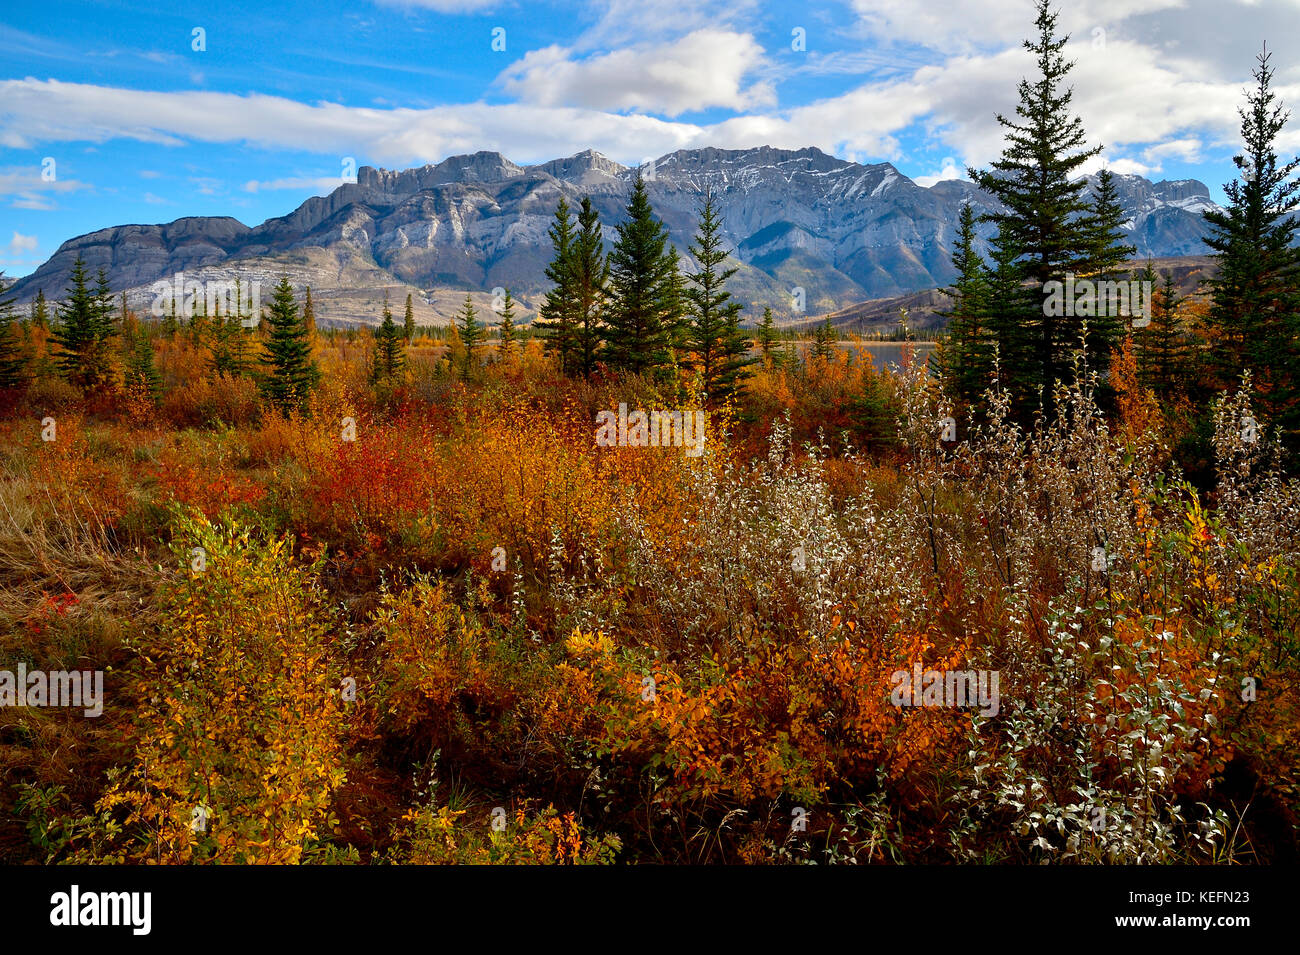 A fall landscape image showing the Miette mountain range in Jasper National Park, Alberta Canada with the changing autumn landscape in the foreground. Stock Photo